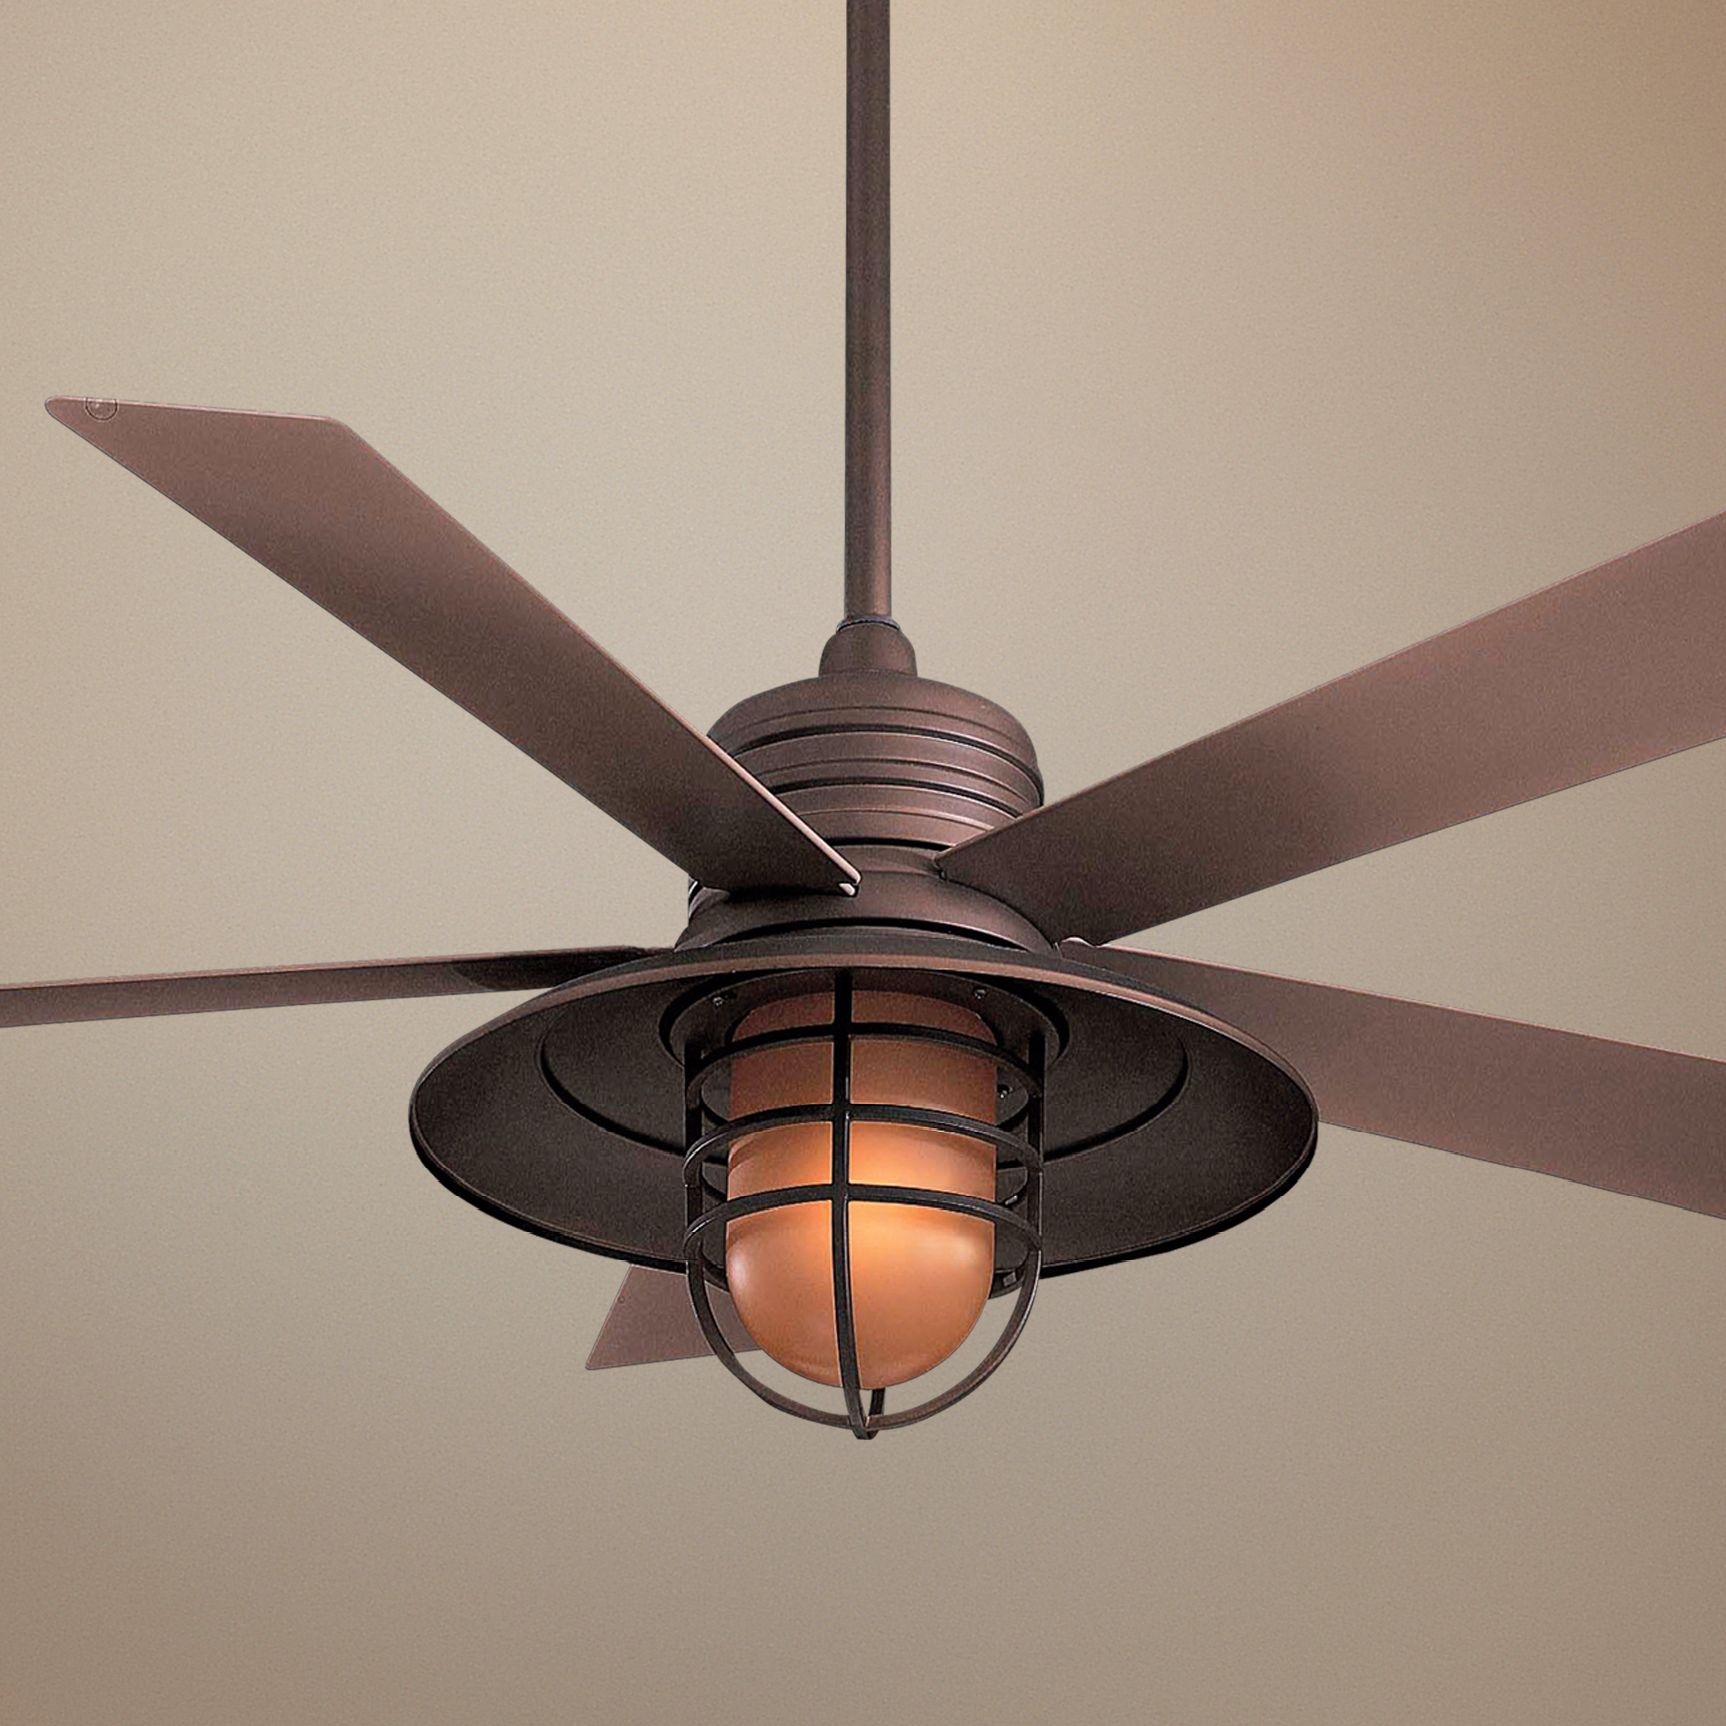 Vintage Style Ceiling Fans With Lights